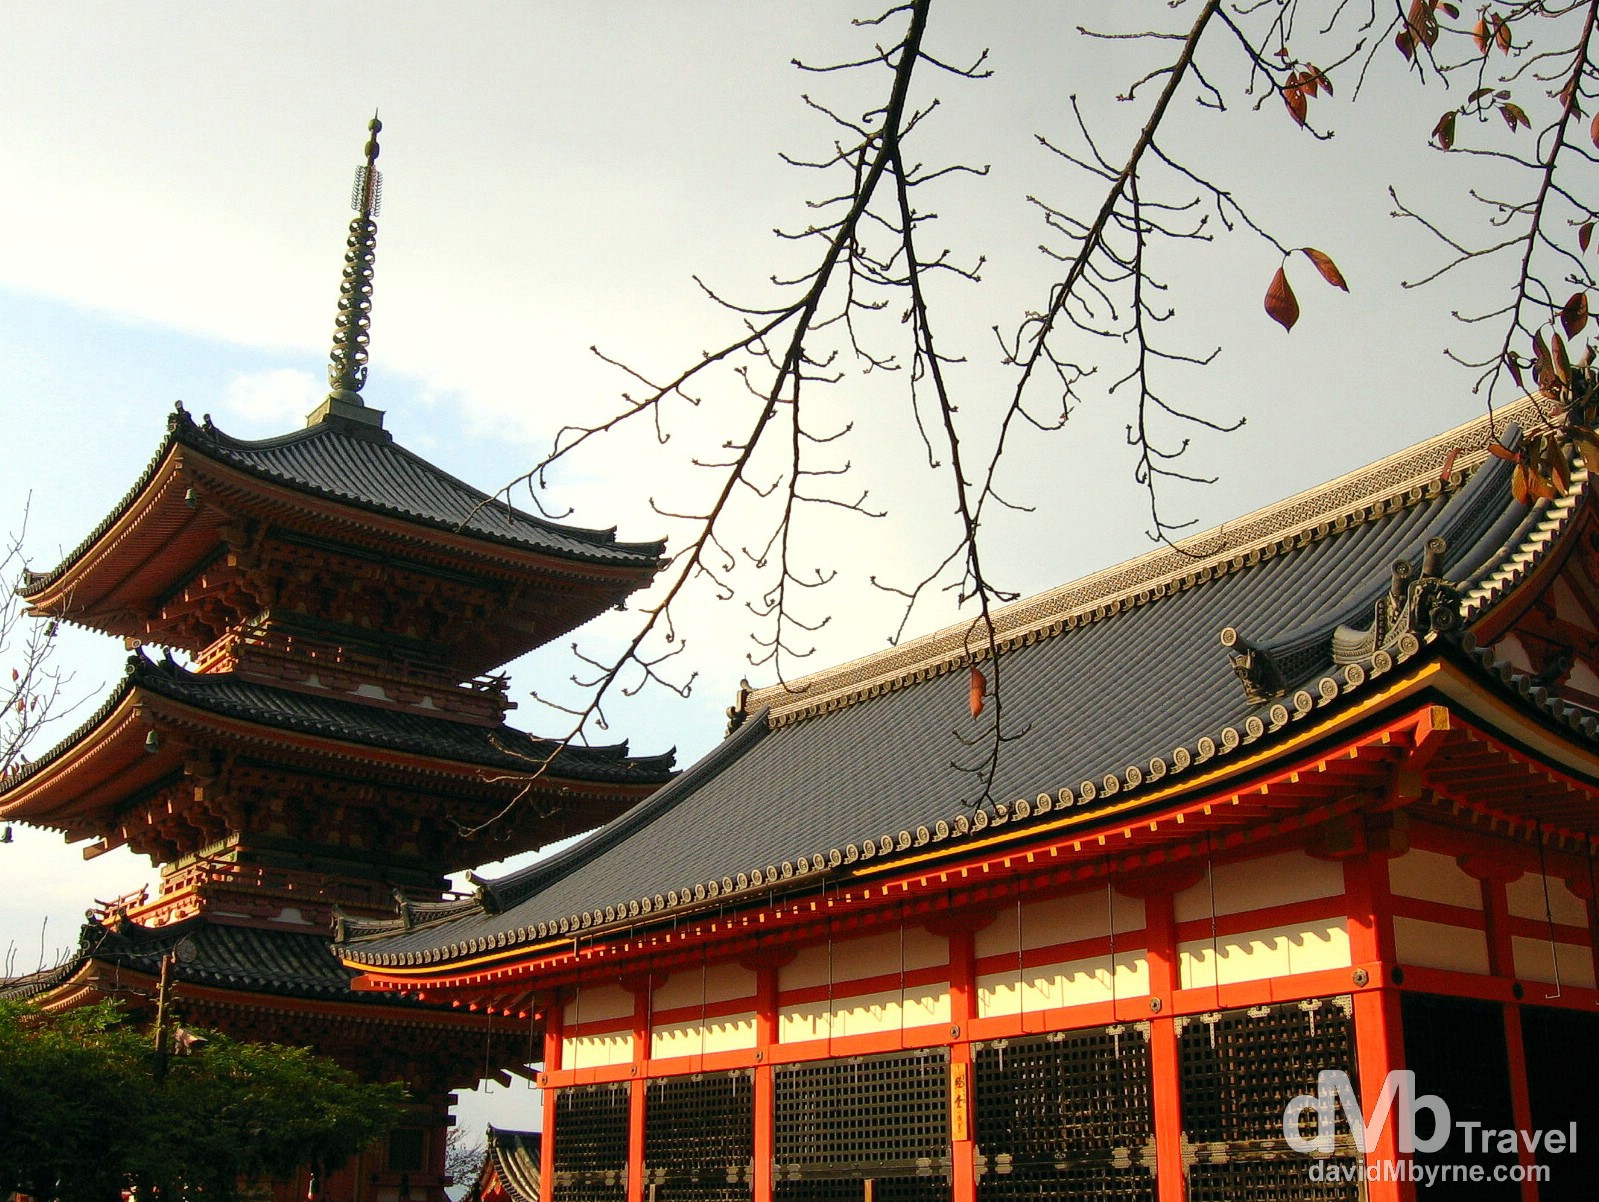 The three-storied pagoda (and another orange building) in the grounds of the Kiyomizu-dera temple. The temple originated in 778 and remains associated with the Hosso sect, one of the oldest sects within Japanese Buddhism. In 1994 the temple was added to the list of UNESCO world heritage sites, having being recognised as 'a place of exceptional and universal value; a cultural heritage site worthy of preservation for the benefit of all mankind'. Kiyomizu-dera Temple, Higashiyama-ku, Kyoto, Japan. November 20th 2007.